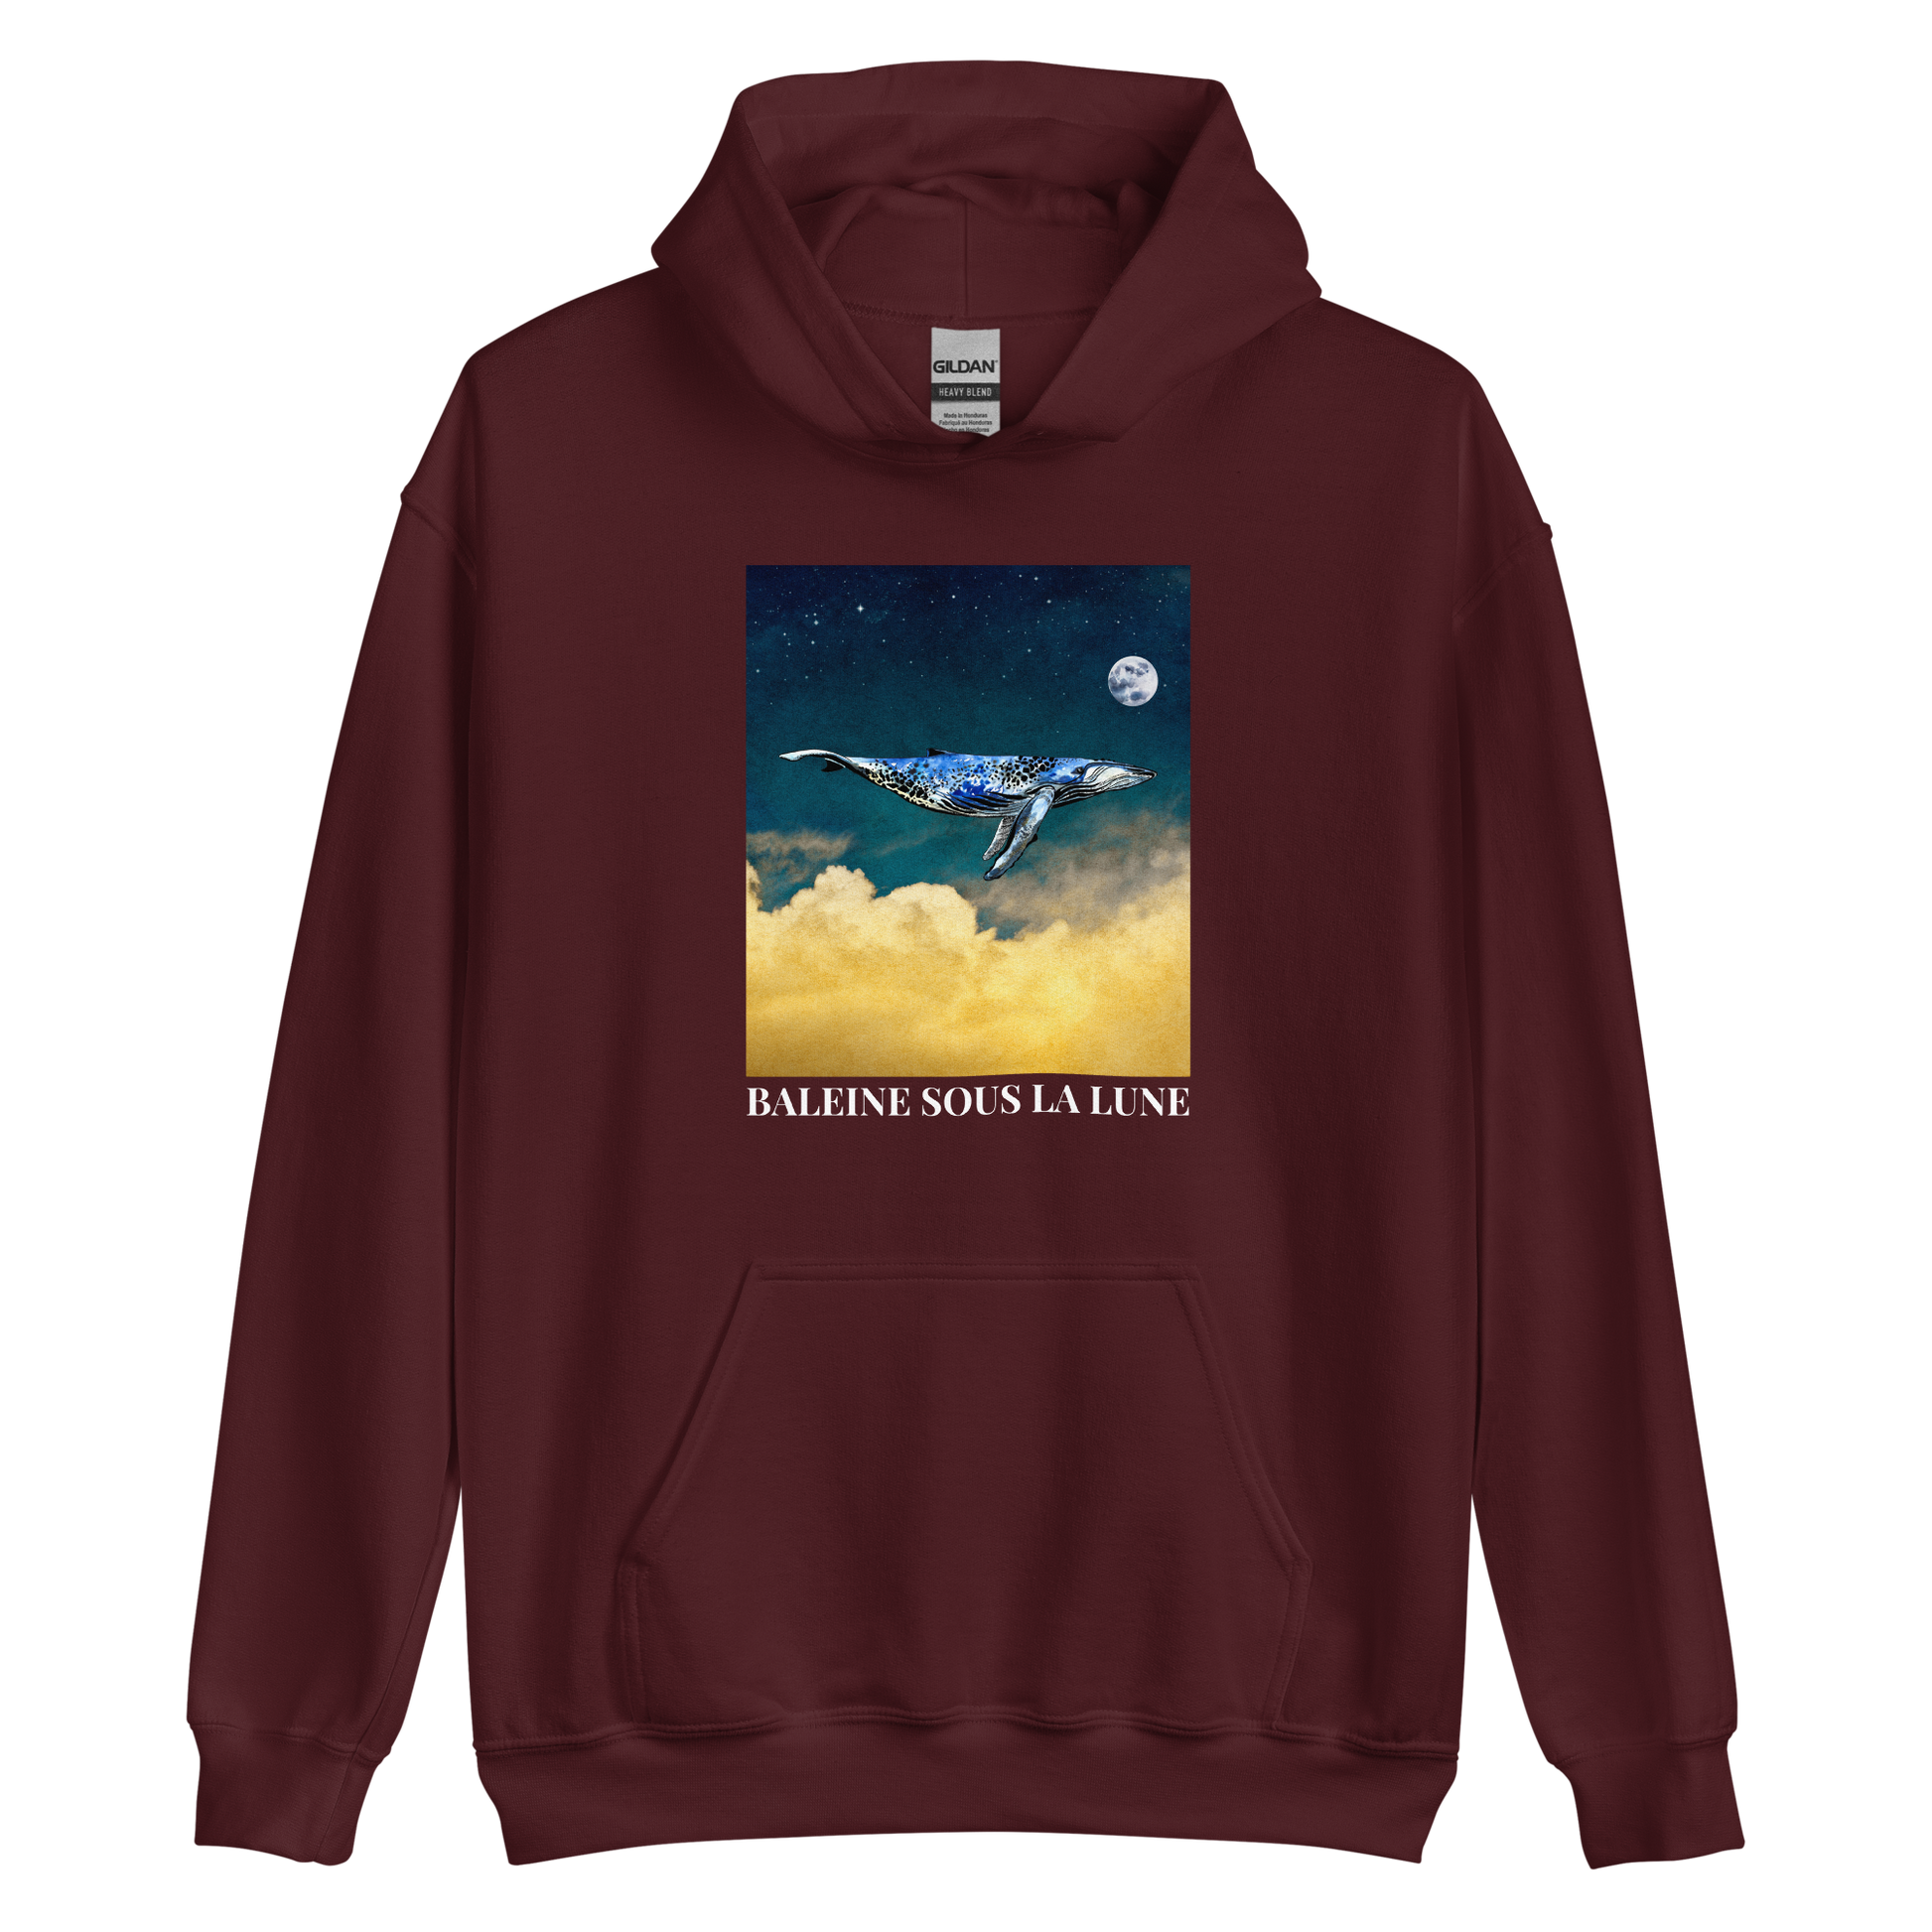 Maroon Whale Hoodie featuring a charming Whale Under The Moon graphic on the chest - Cool Graphic Whale Hoodies - Boozy Fox